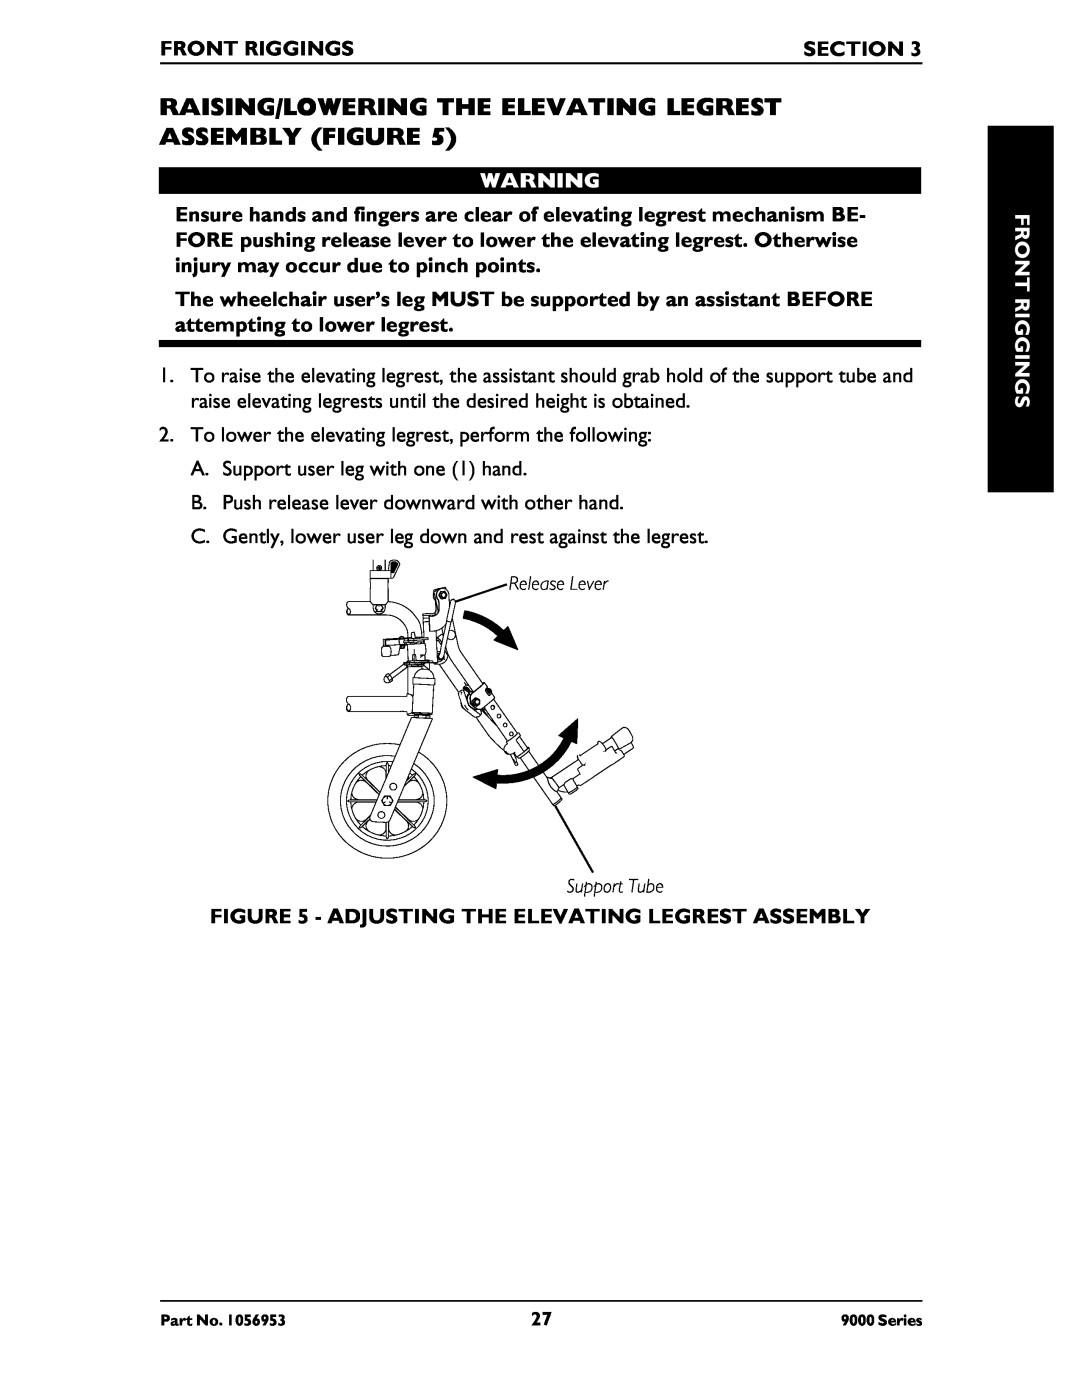 Invacare 9000 Series, 9000 XT, 9000 XDT Raising/Lowering The Elevating Legrest Assembly Figure, Front Riggings, Section 